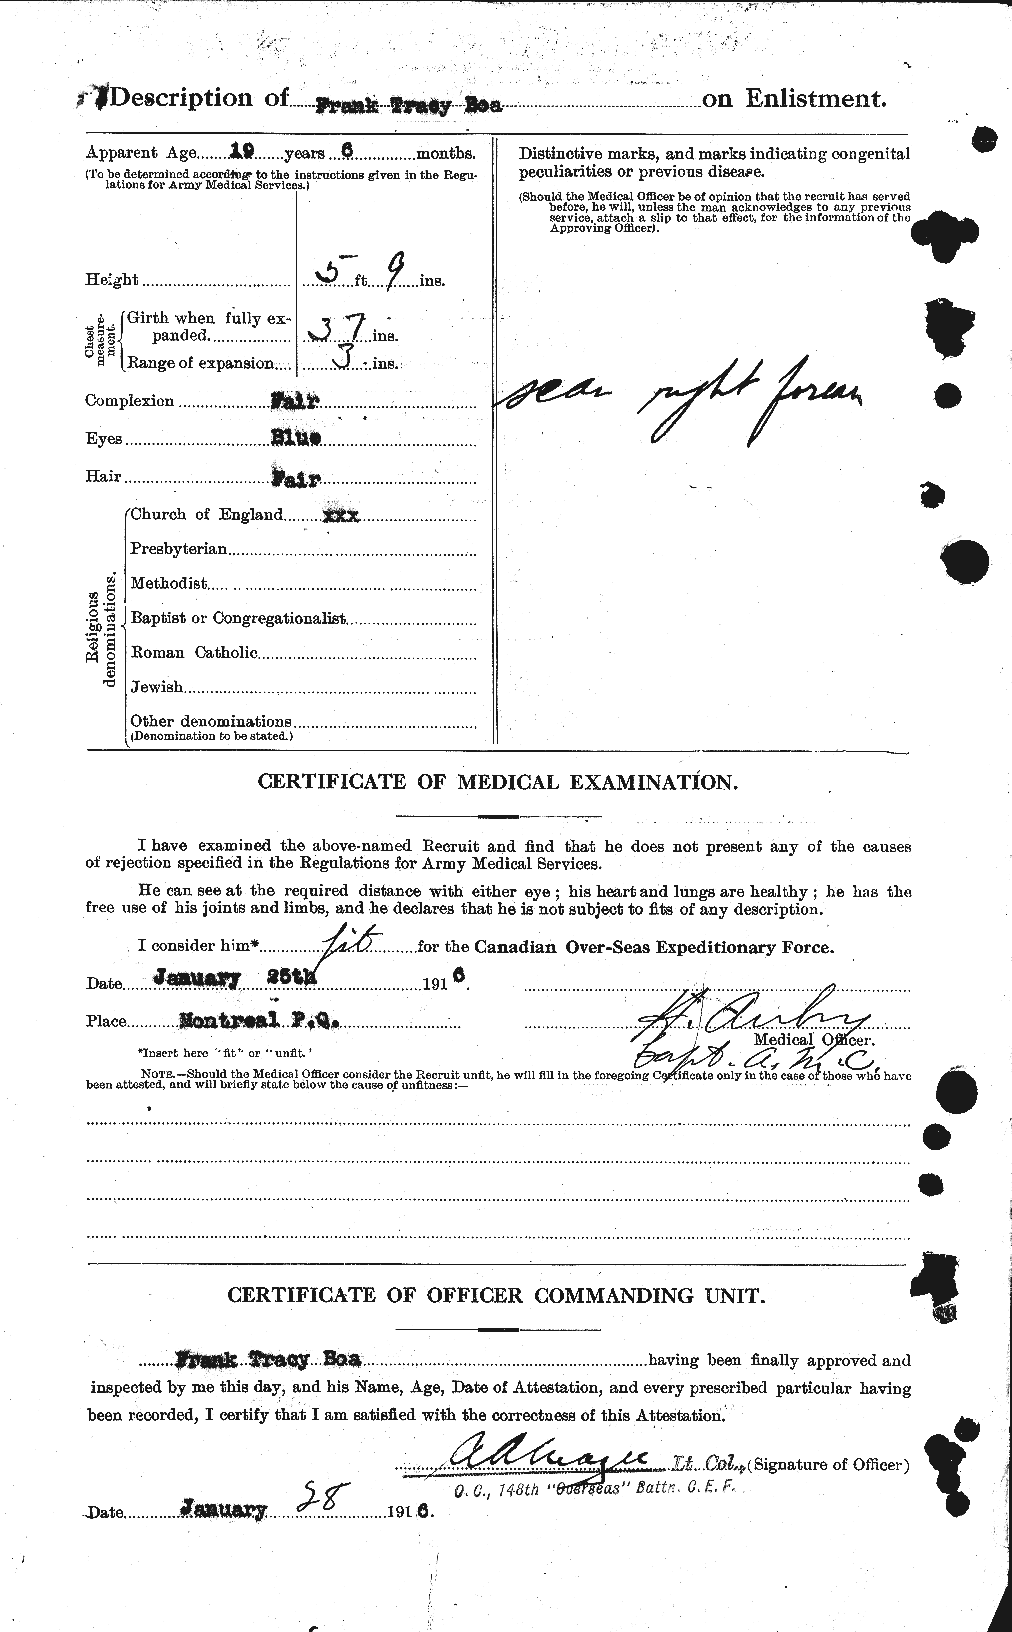 Personnel Records of the First World War - CEF 247354b